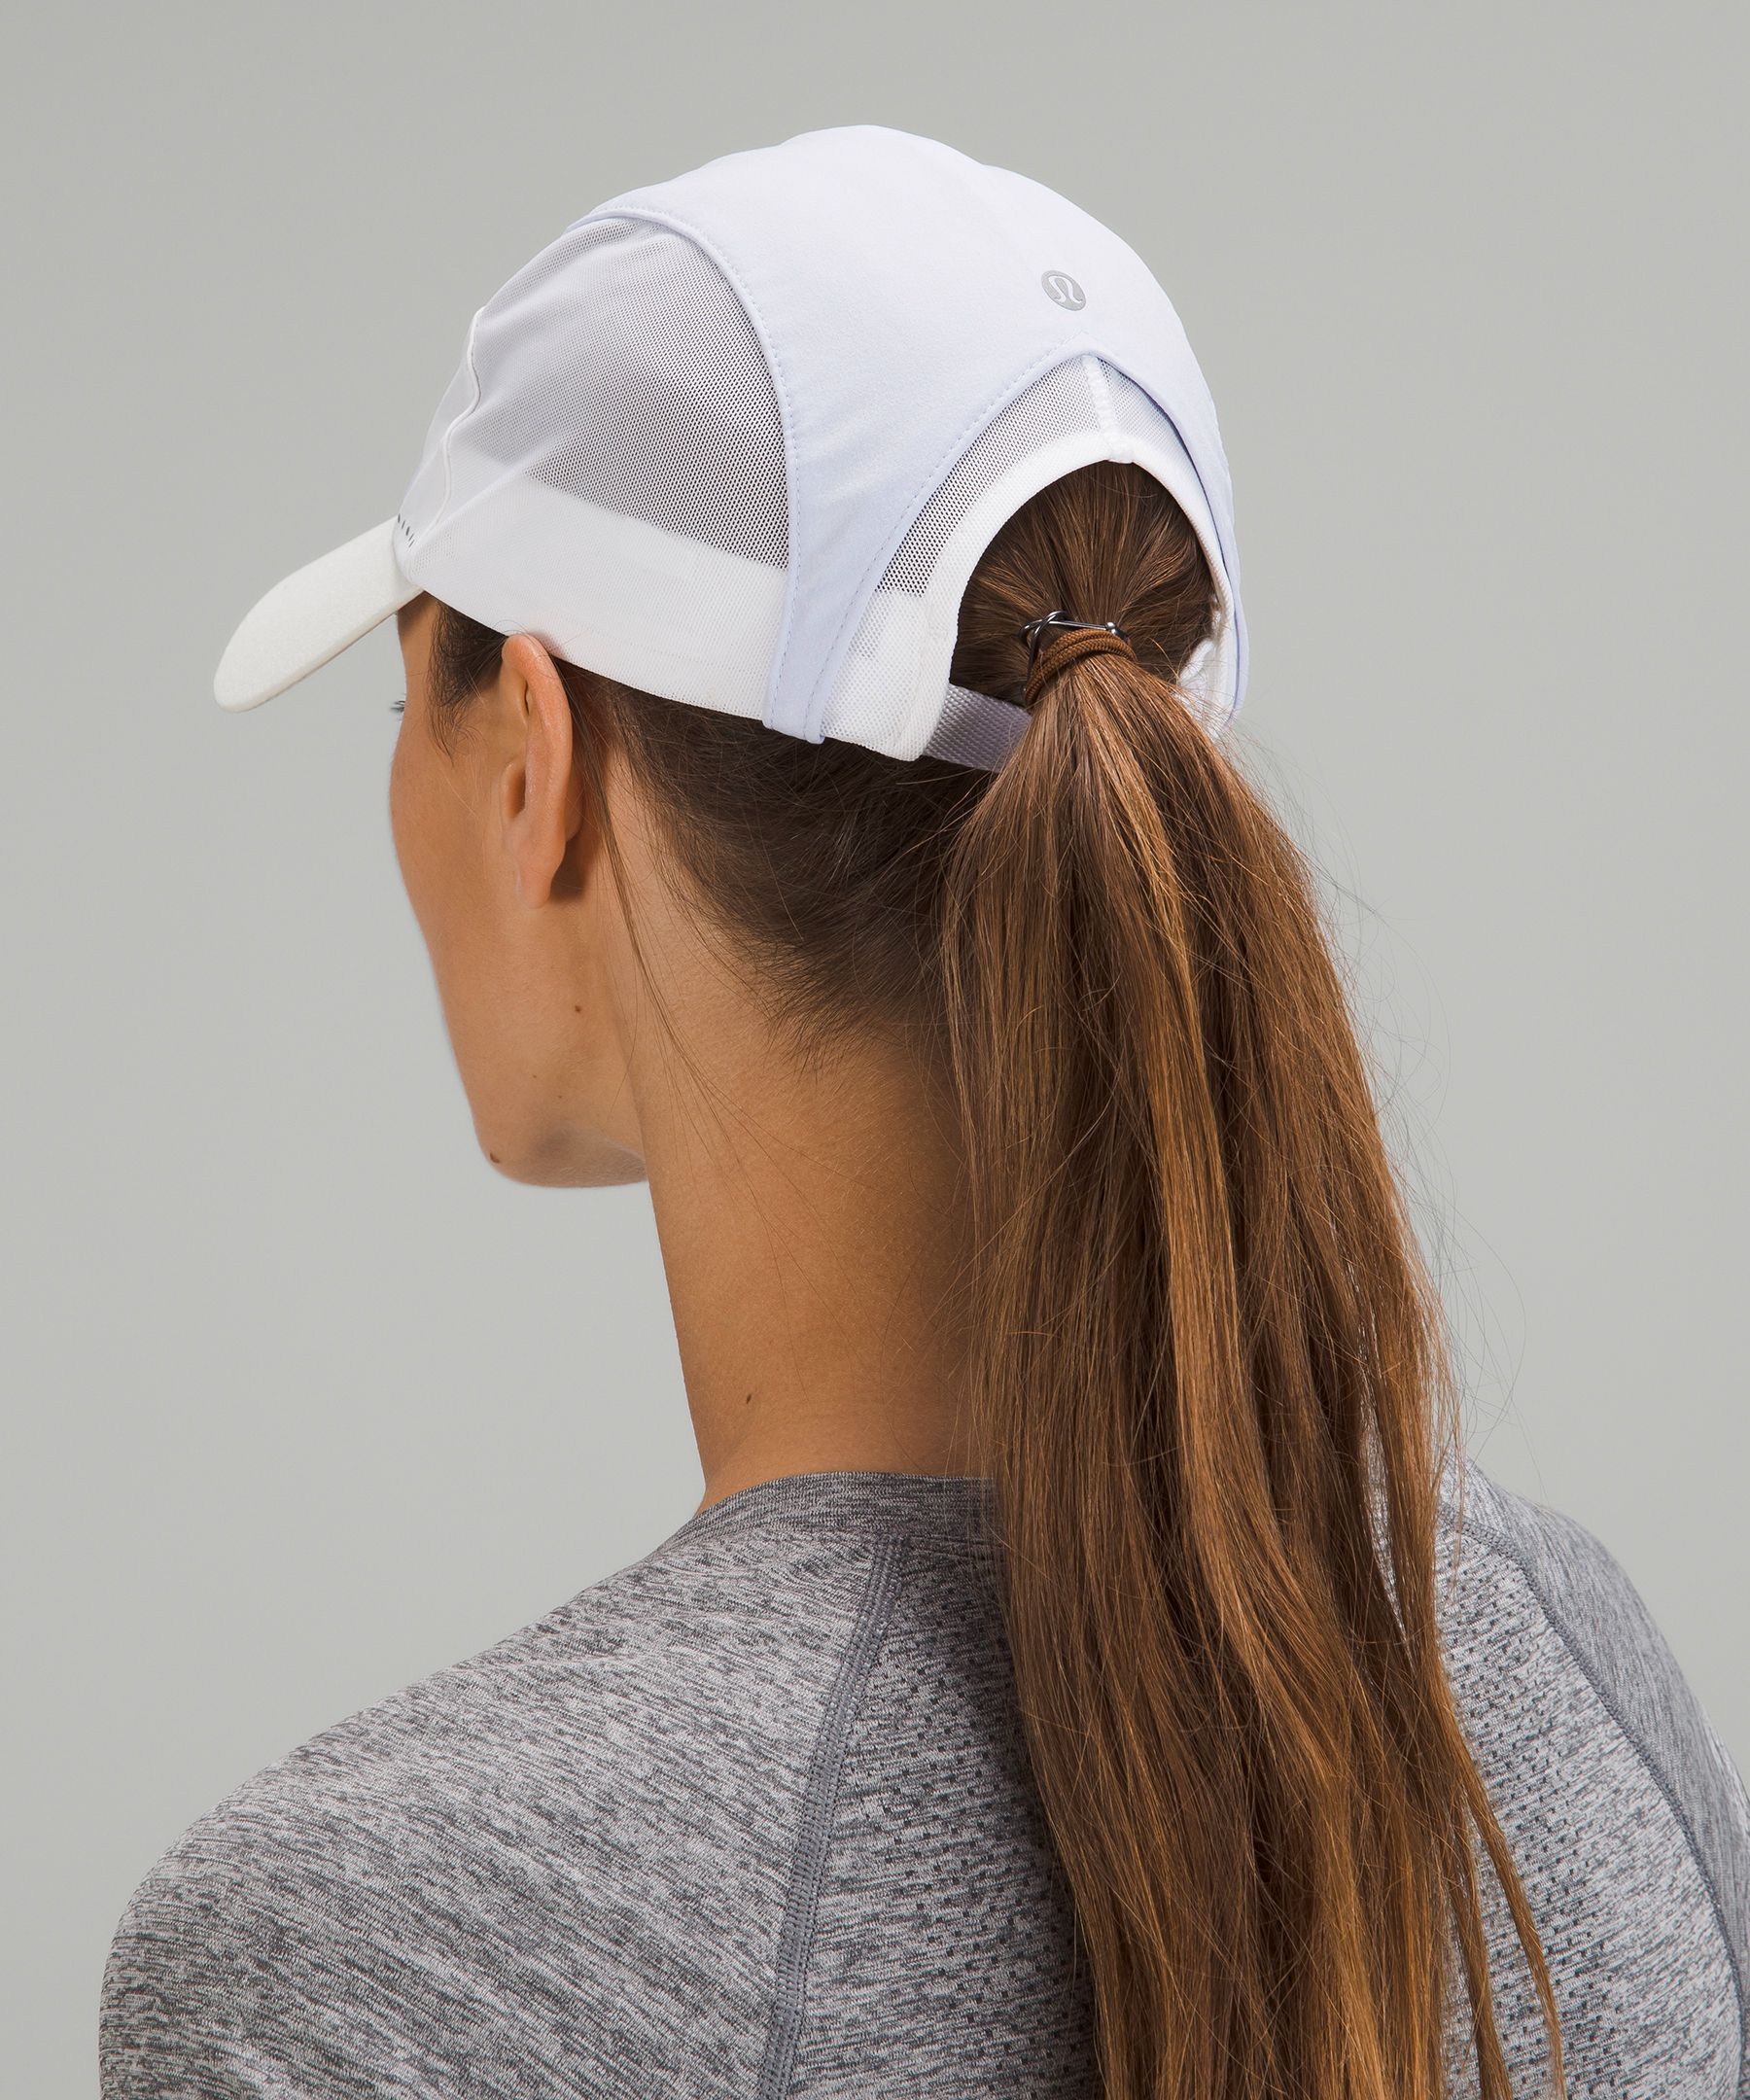 Lululemon Women's Fast and Free Running Hat Elite *Online Only. 3